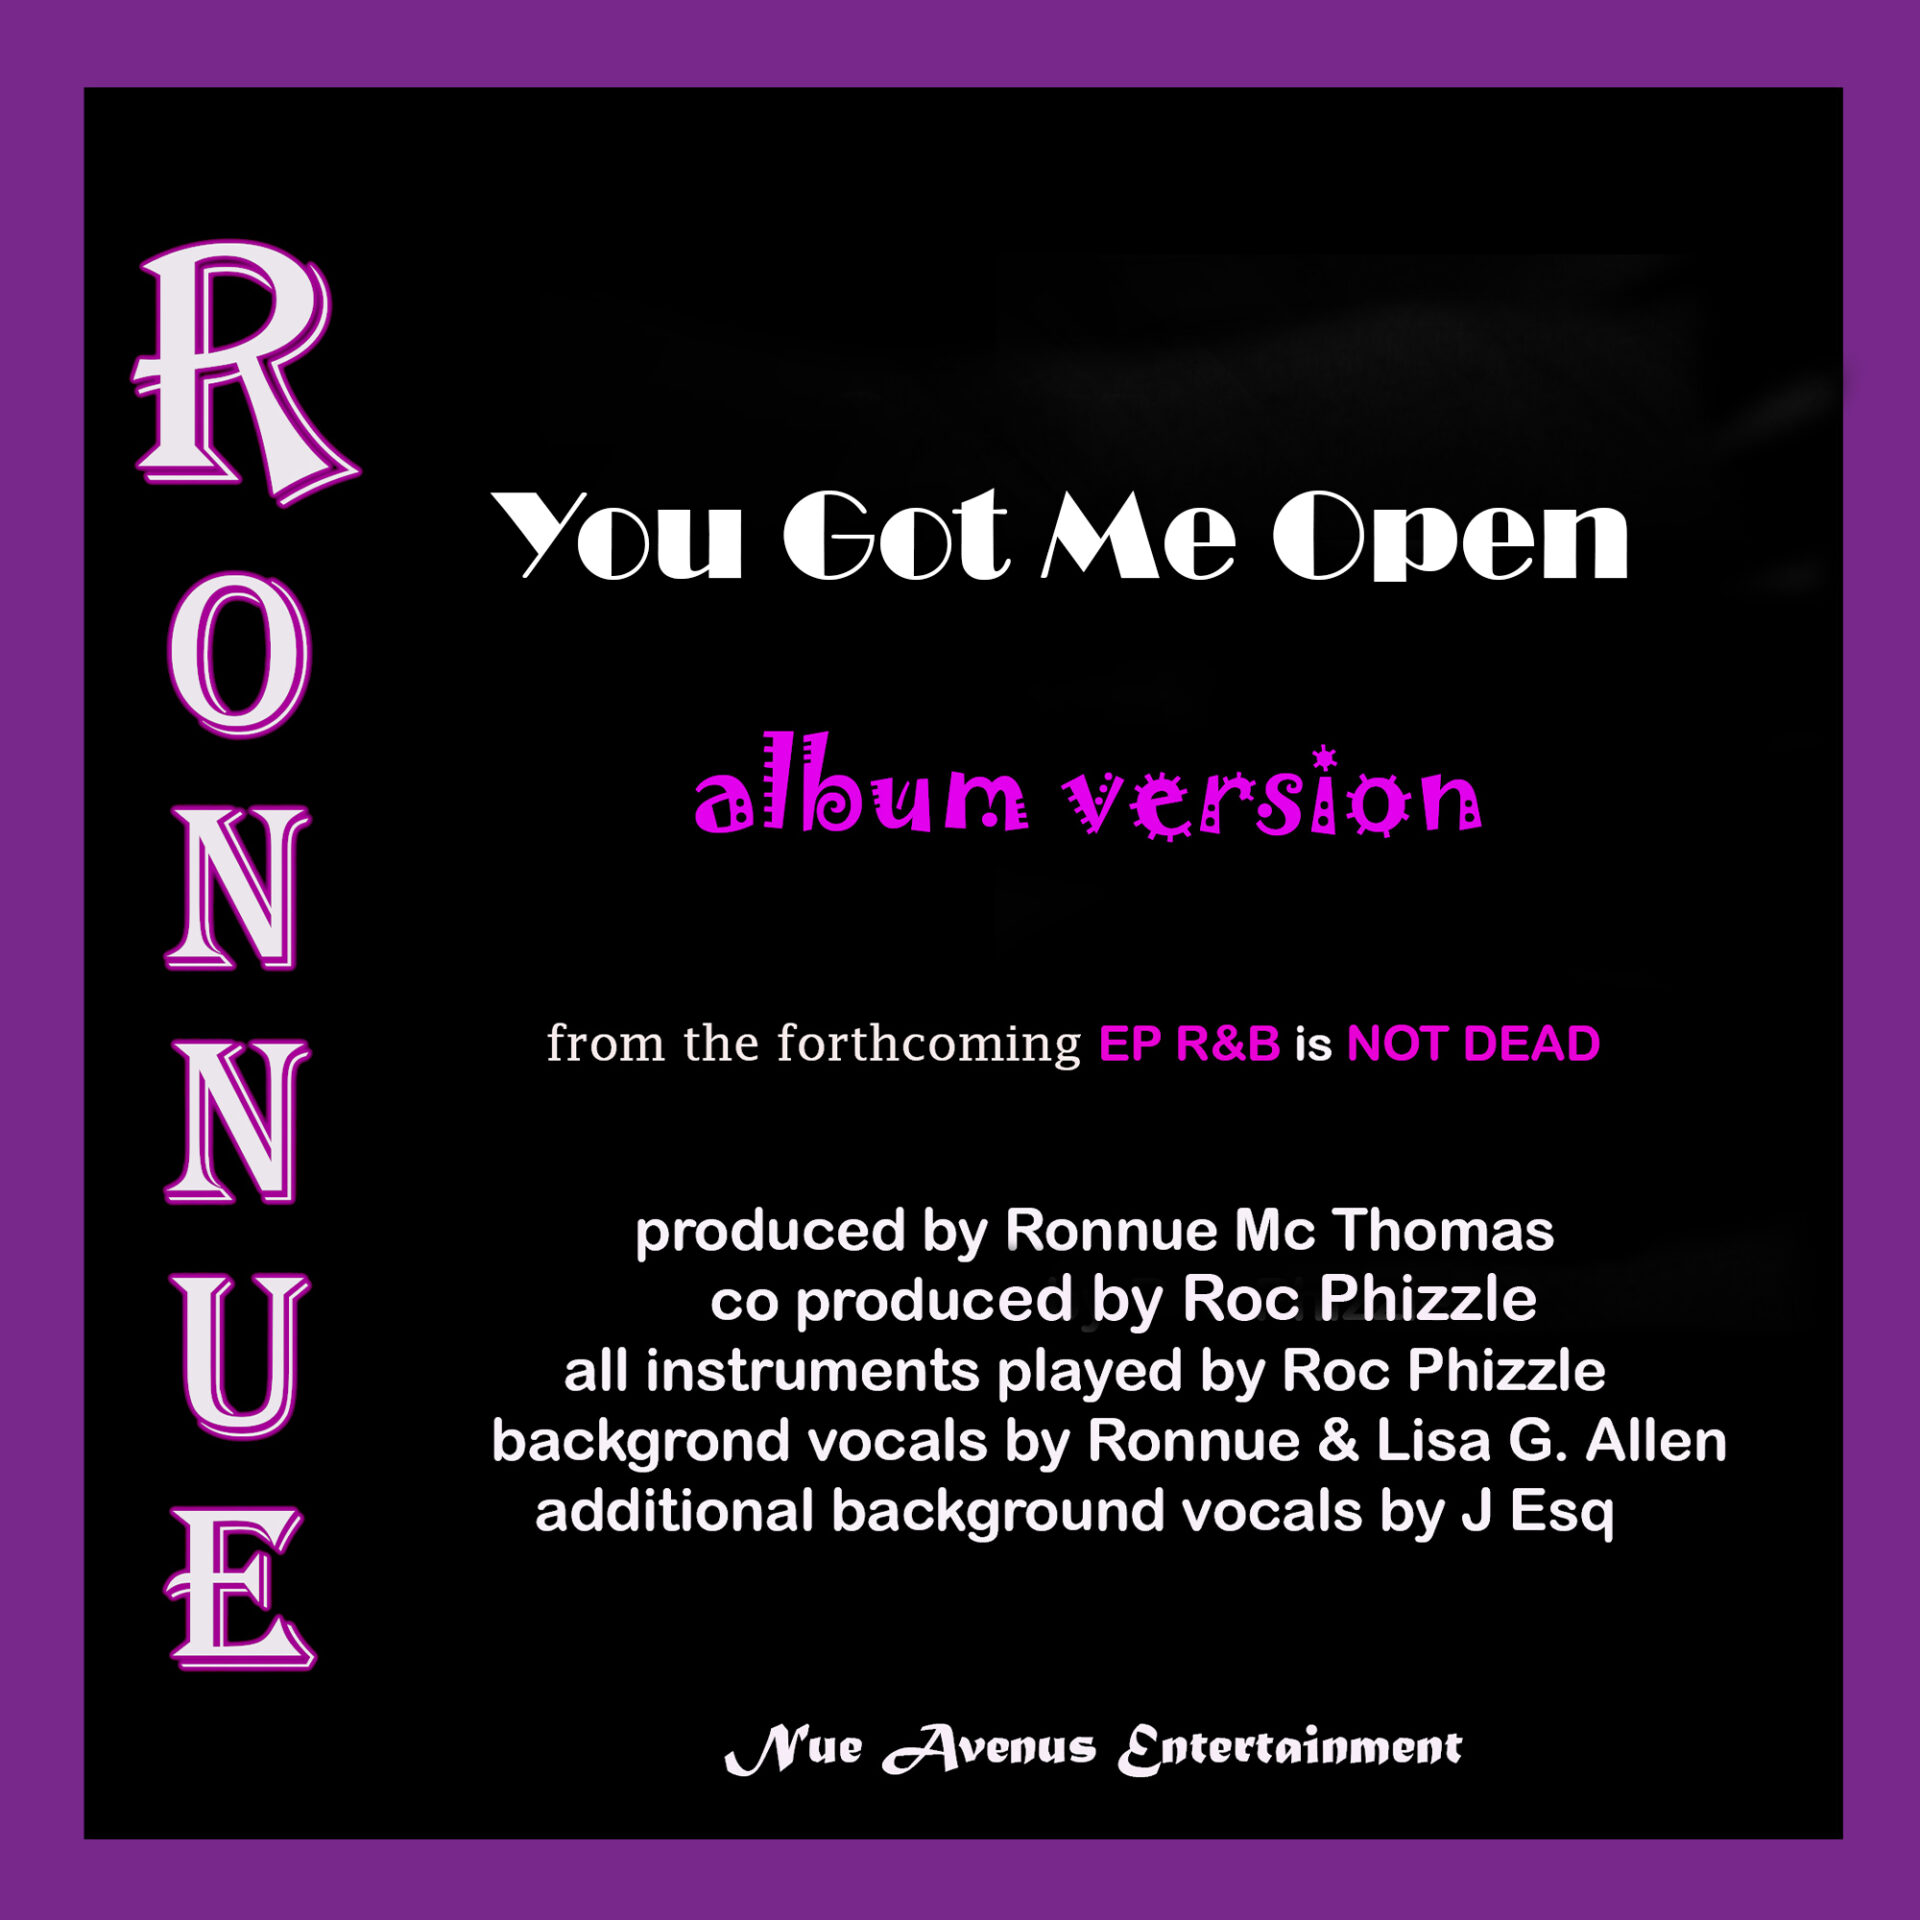 You Got Me Open by Ronnue album cover artwork